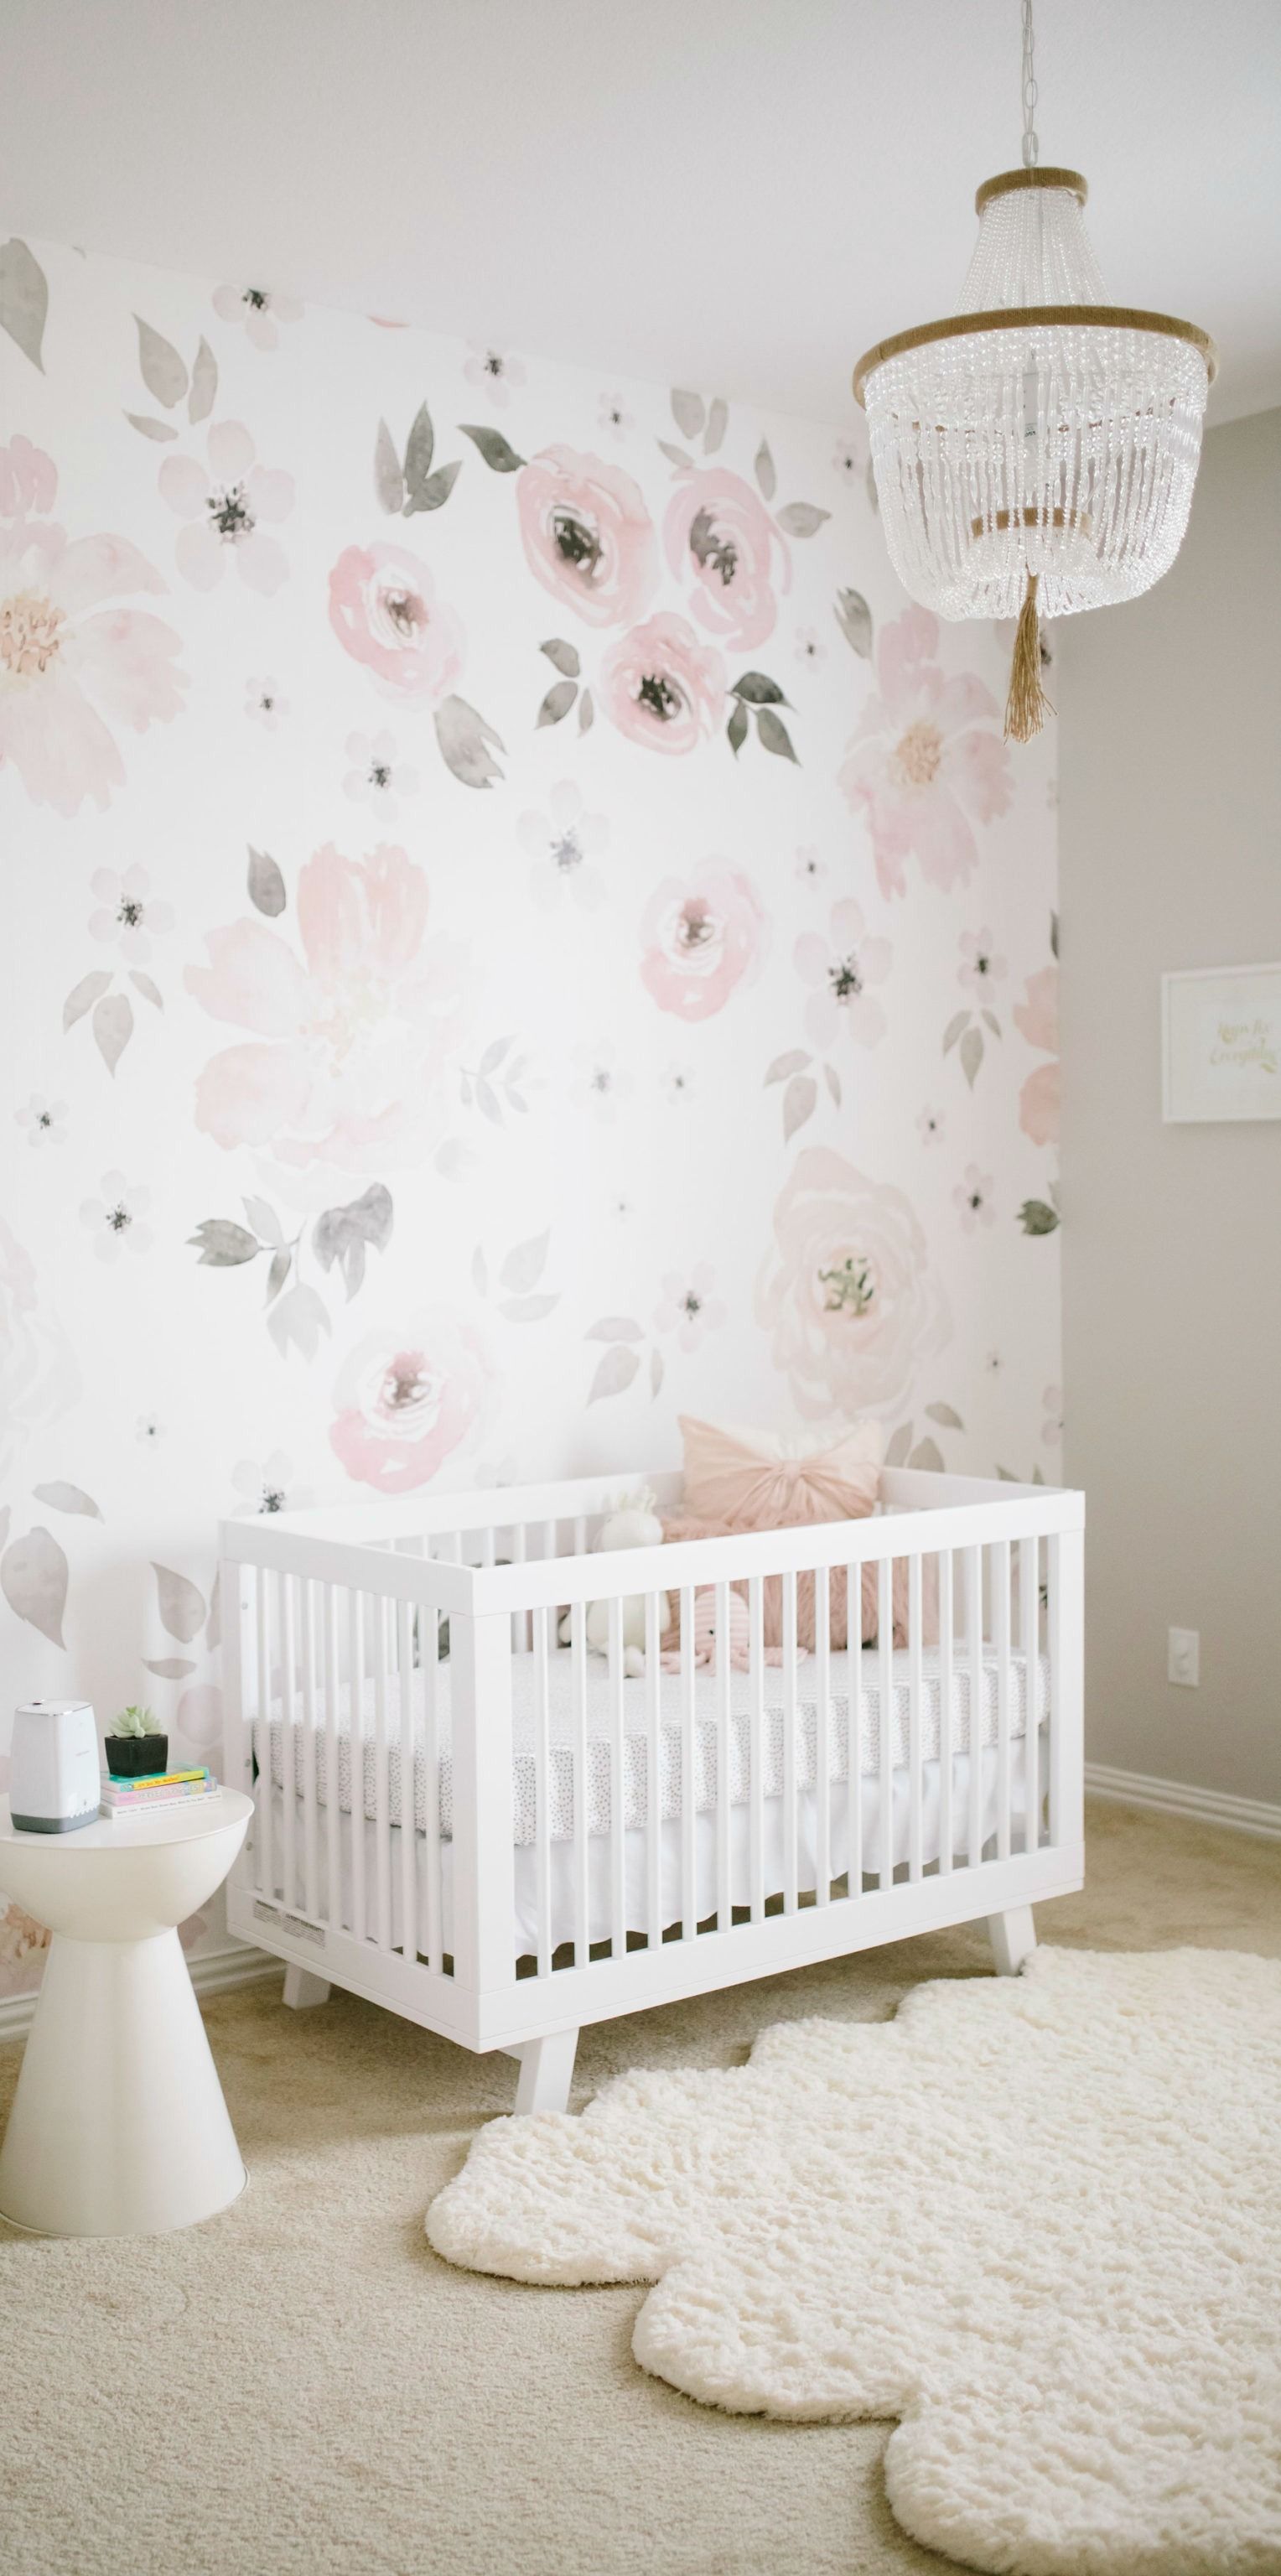 baby wallpaper design,product,infant bed,white,room,wall